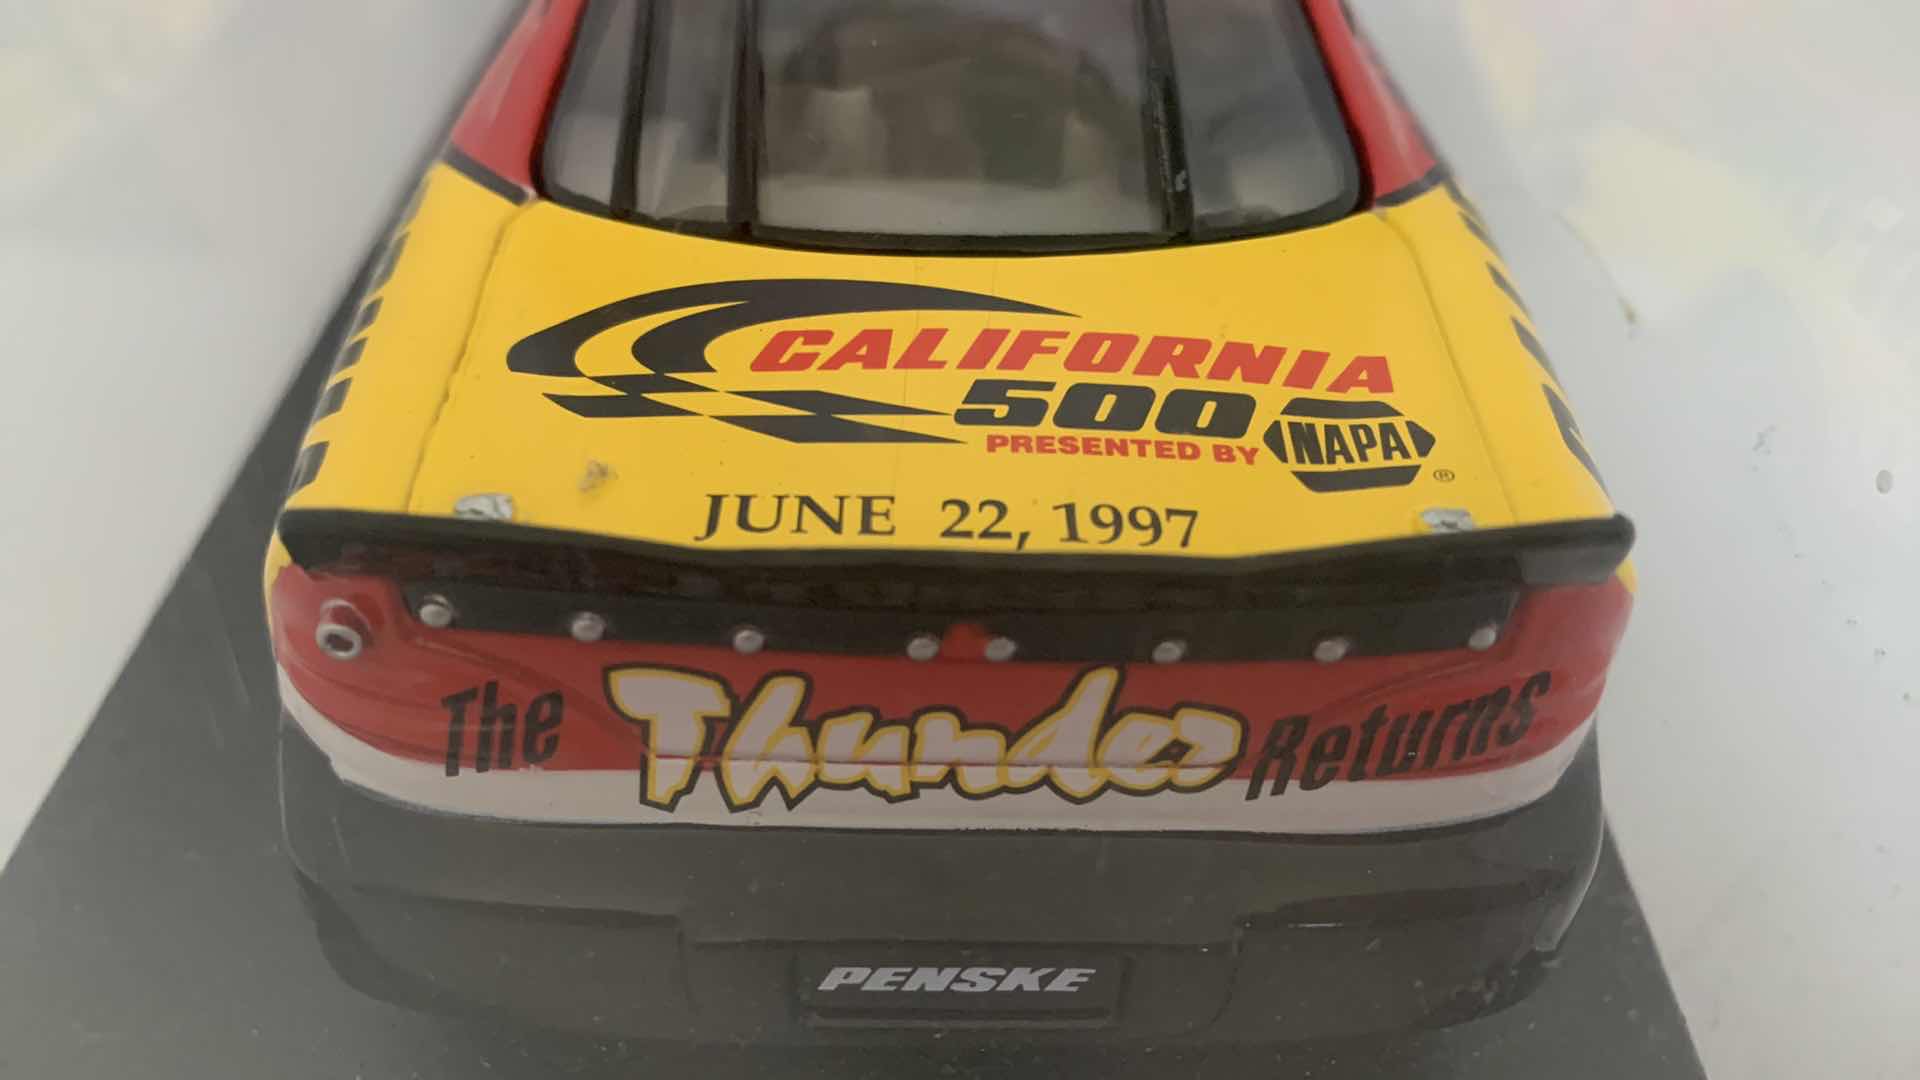 Photo 4 of SPORTS IMPRESSIONS JUNE 22, 1997 CALIFORNIA THUNDER DIE CAST RACE CAR IN SHOW CASE.